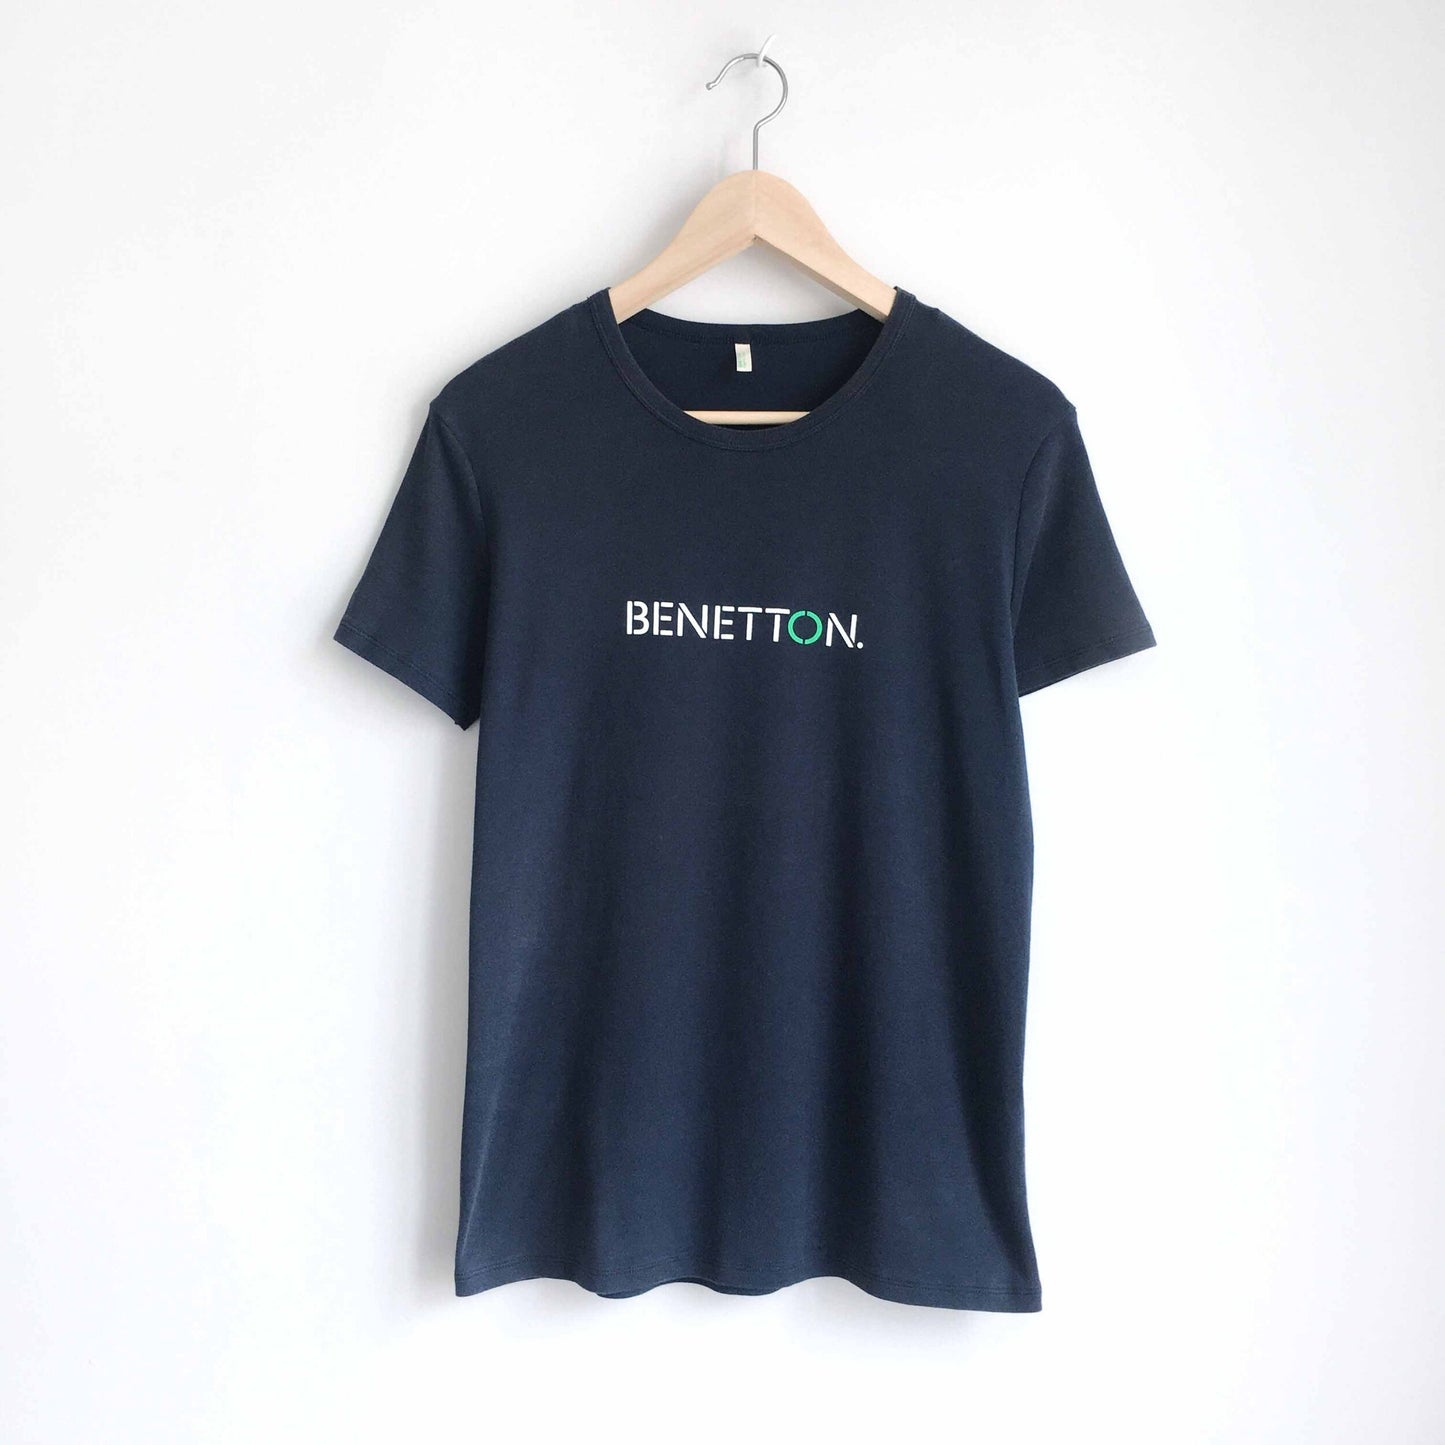 United Colors of Benetton vintage logo tee - size Large